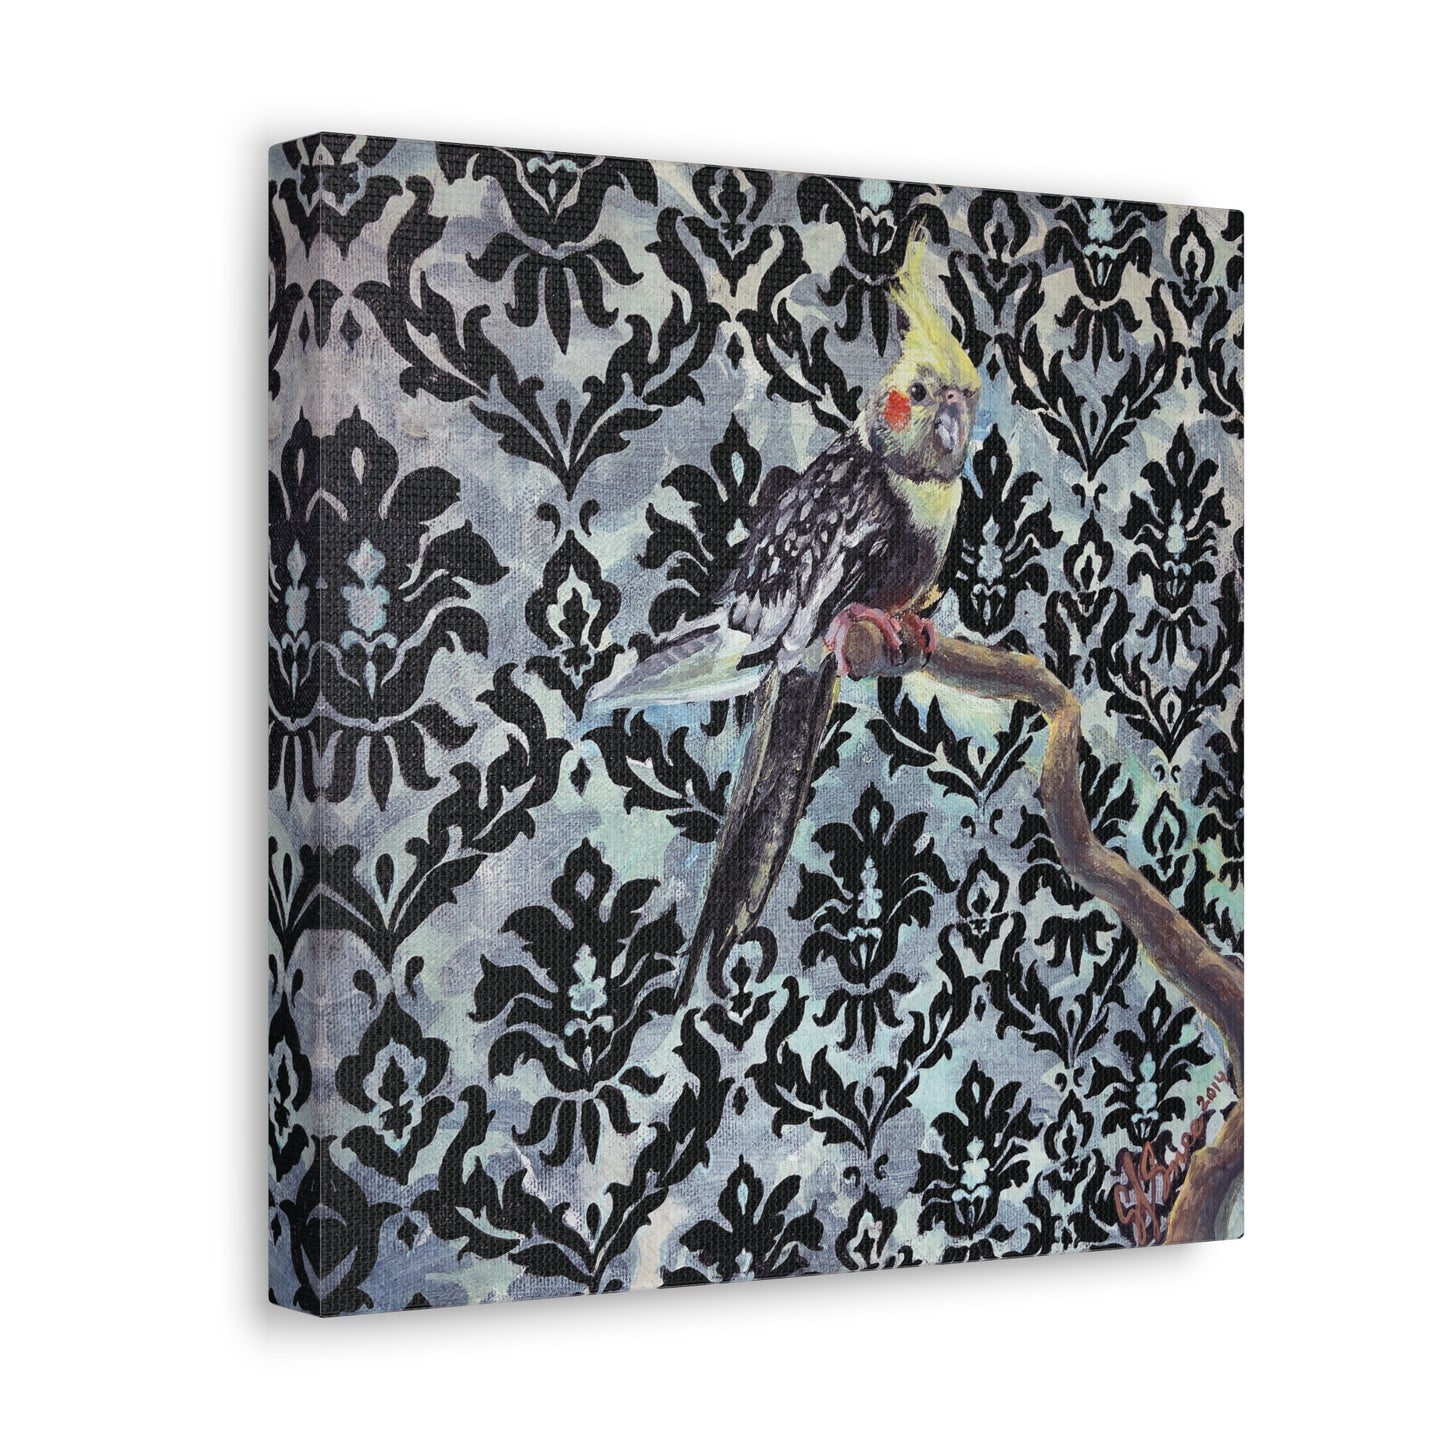 "Vintage Camouflage" Canvas Gallery Wraps